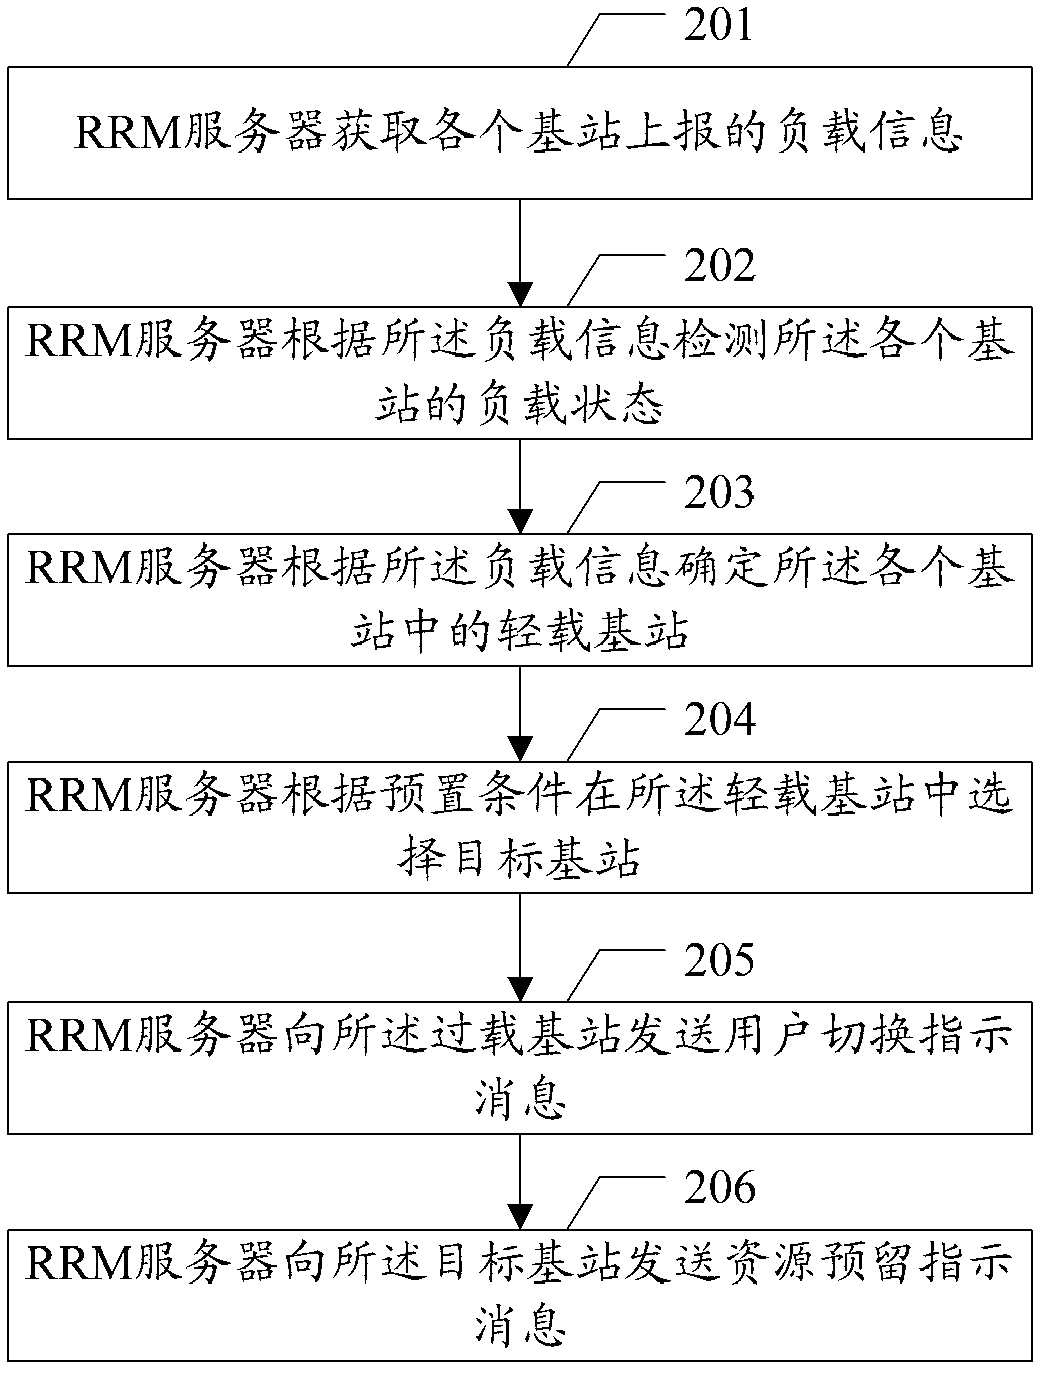 Load balancing method and related device